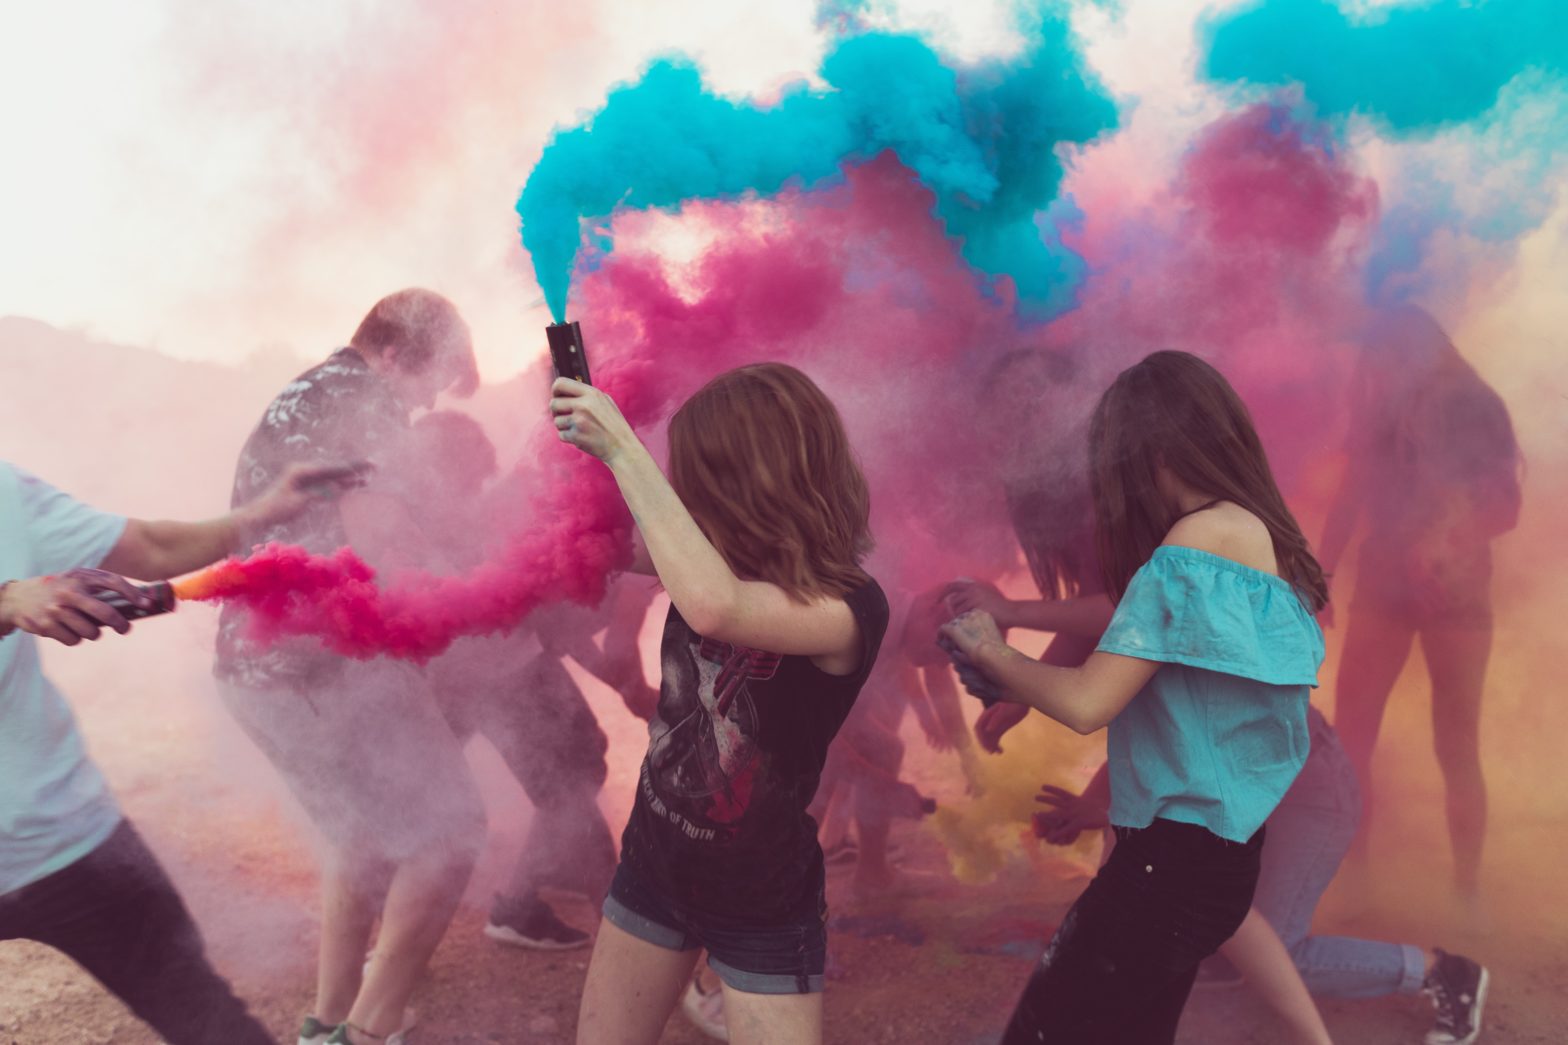 Middle school kids playing with pink and blue color powder.